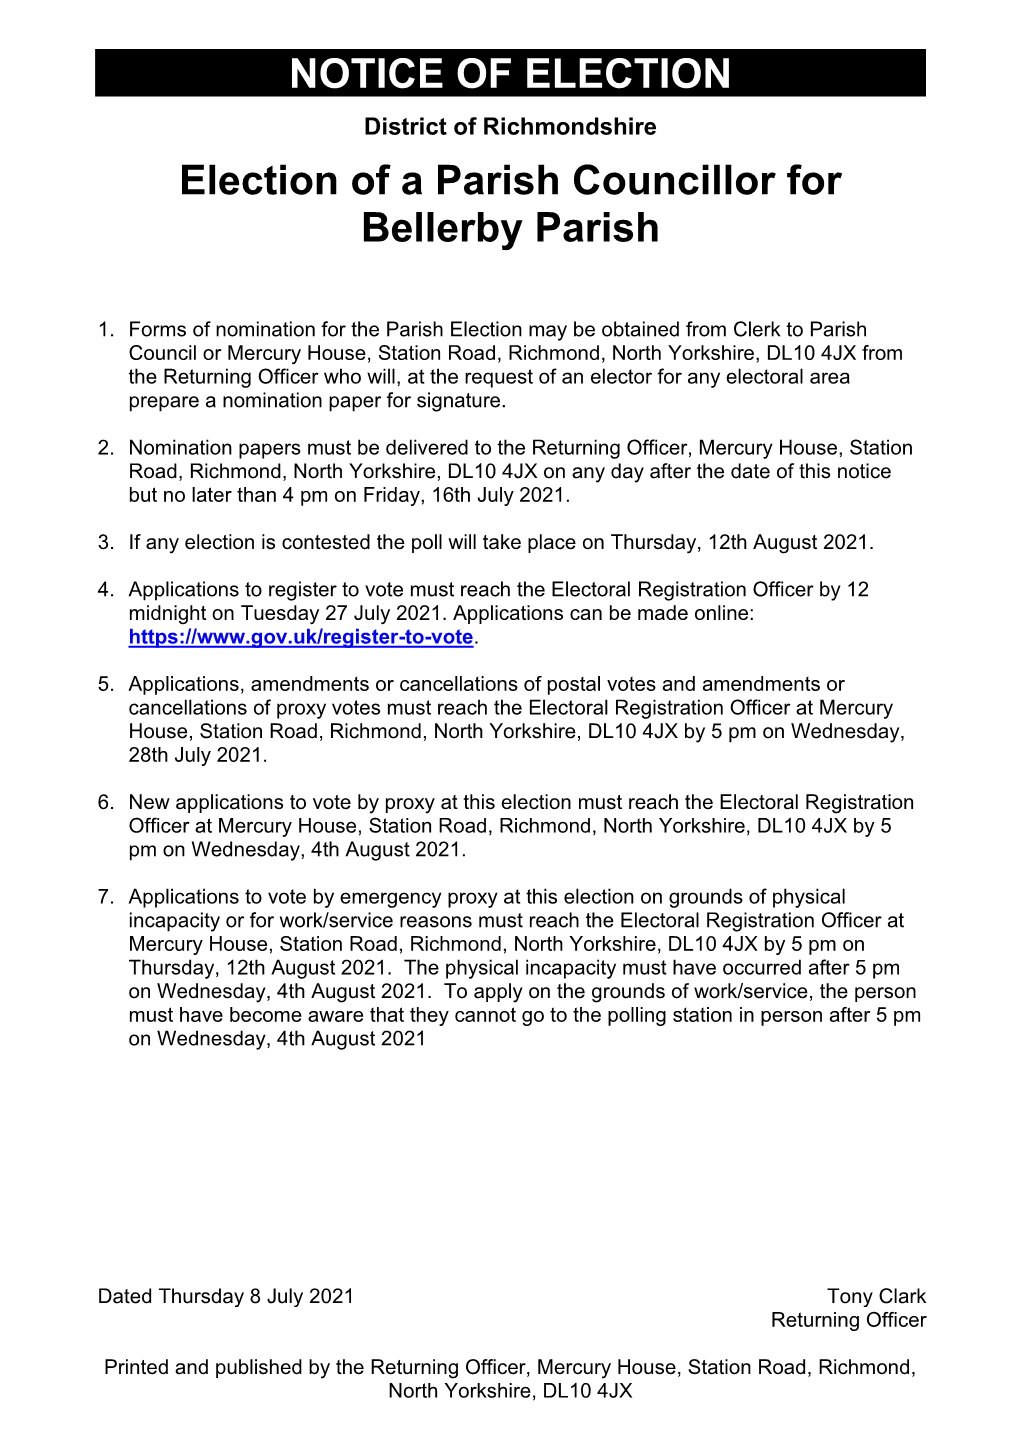 Notice of Election of a Parish Councillor for Bellerby